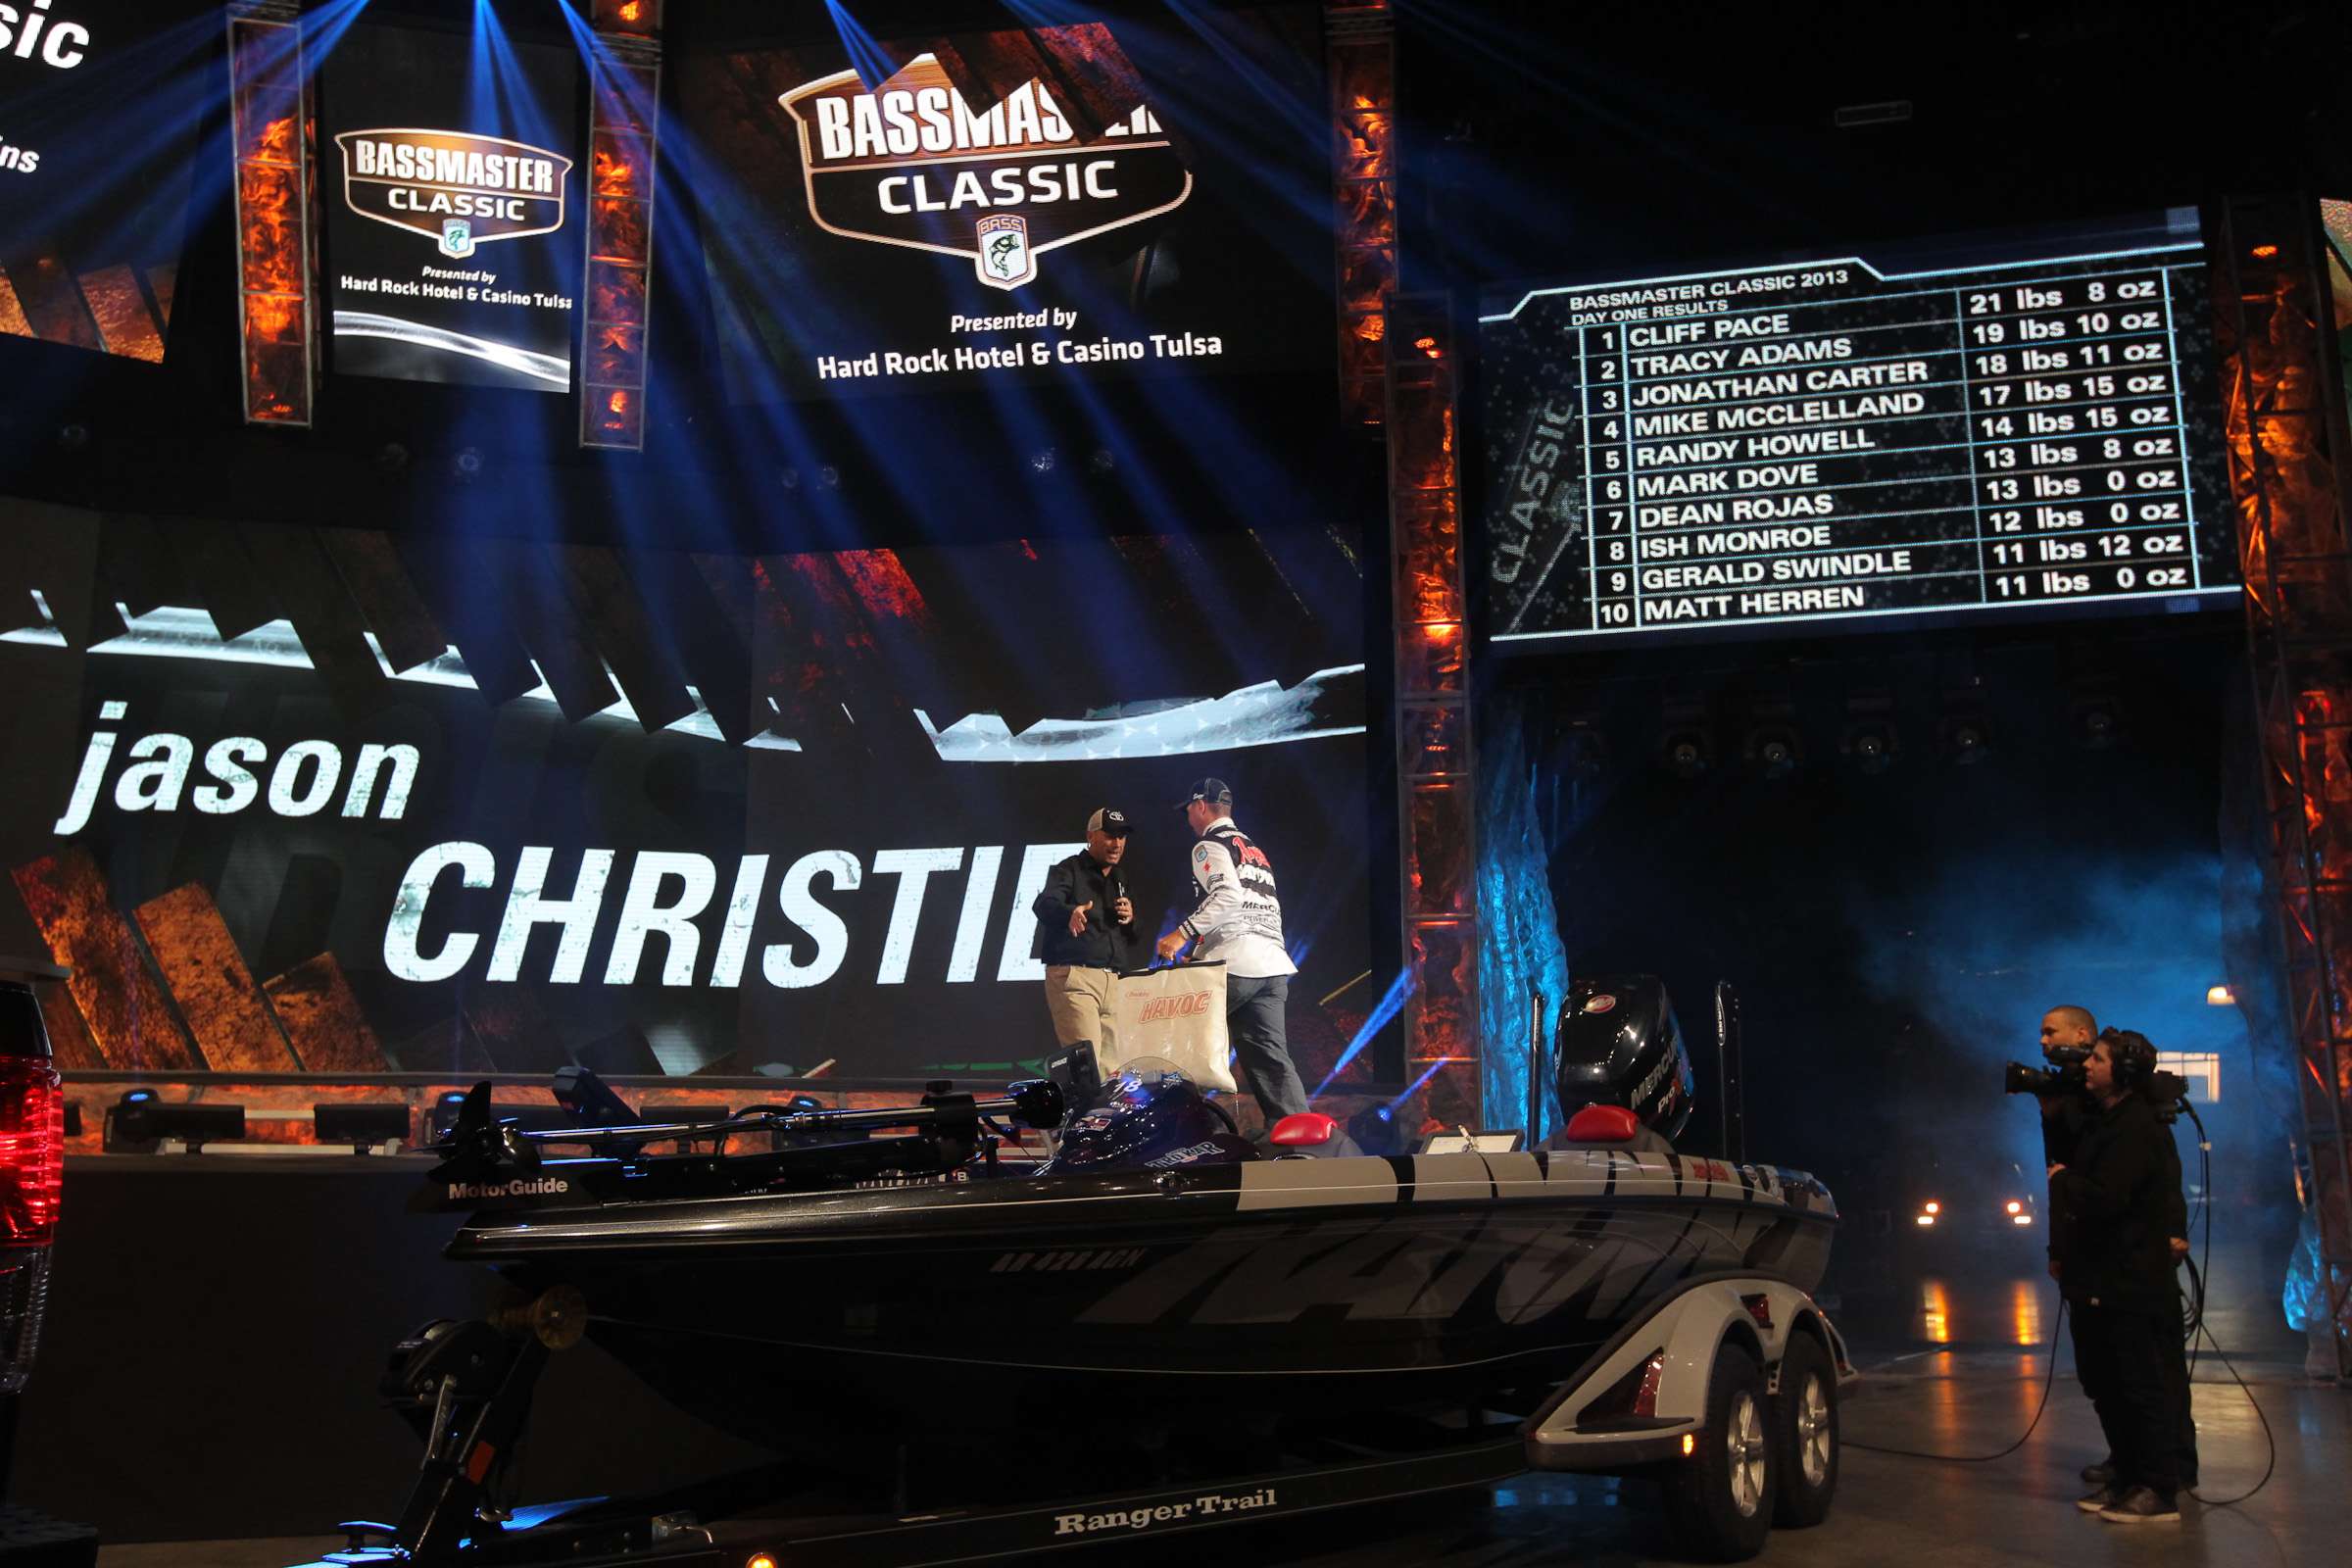 Christie's four tour level victories in the last two years have propelled him to the No. 1 spot in BassFan.com's final rankings for both 2013 and 2014. Shown here on the 2013 Bassmaster Classic stage, Christie said recently, 